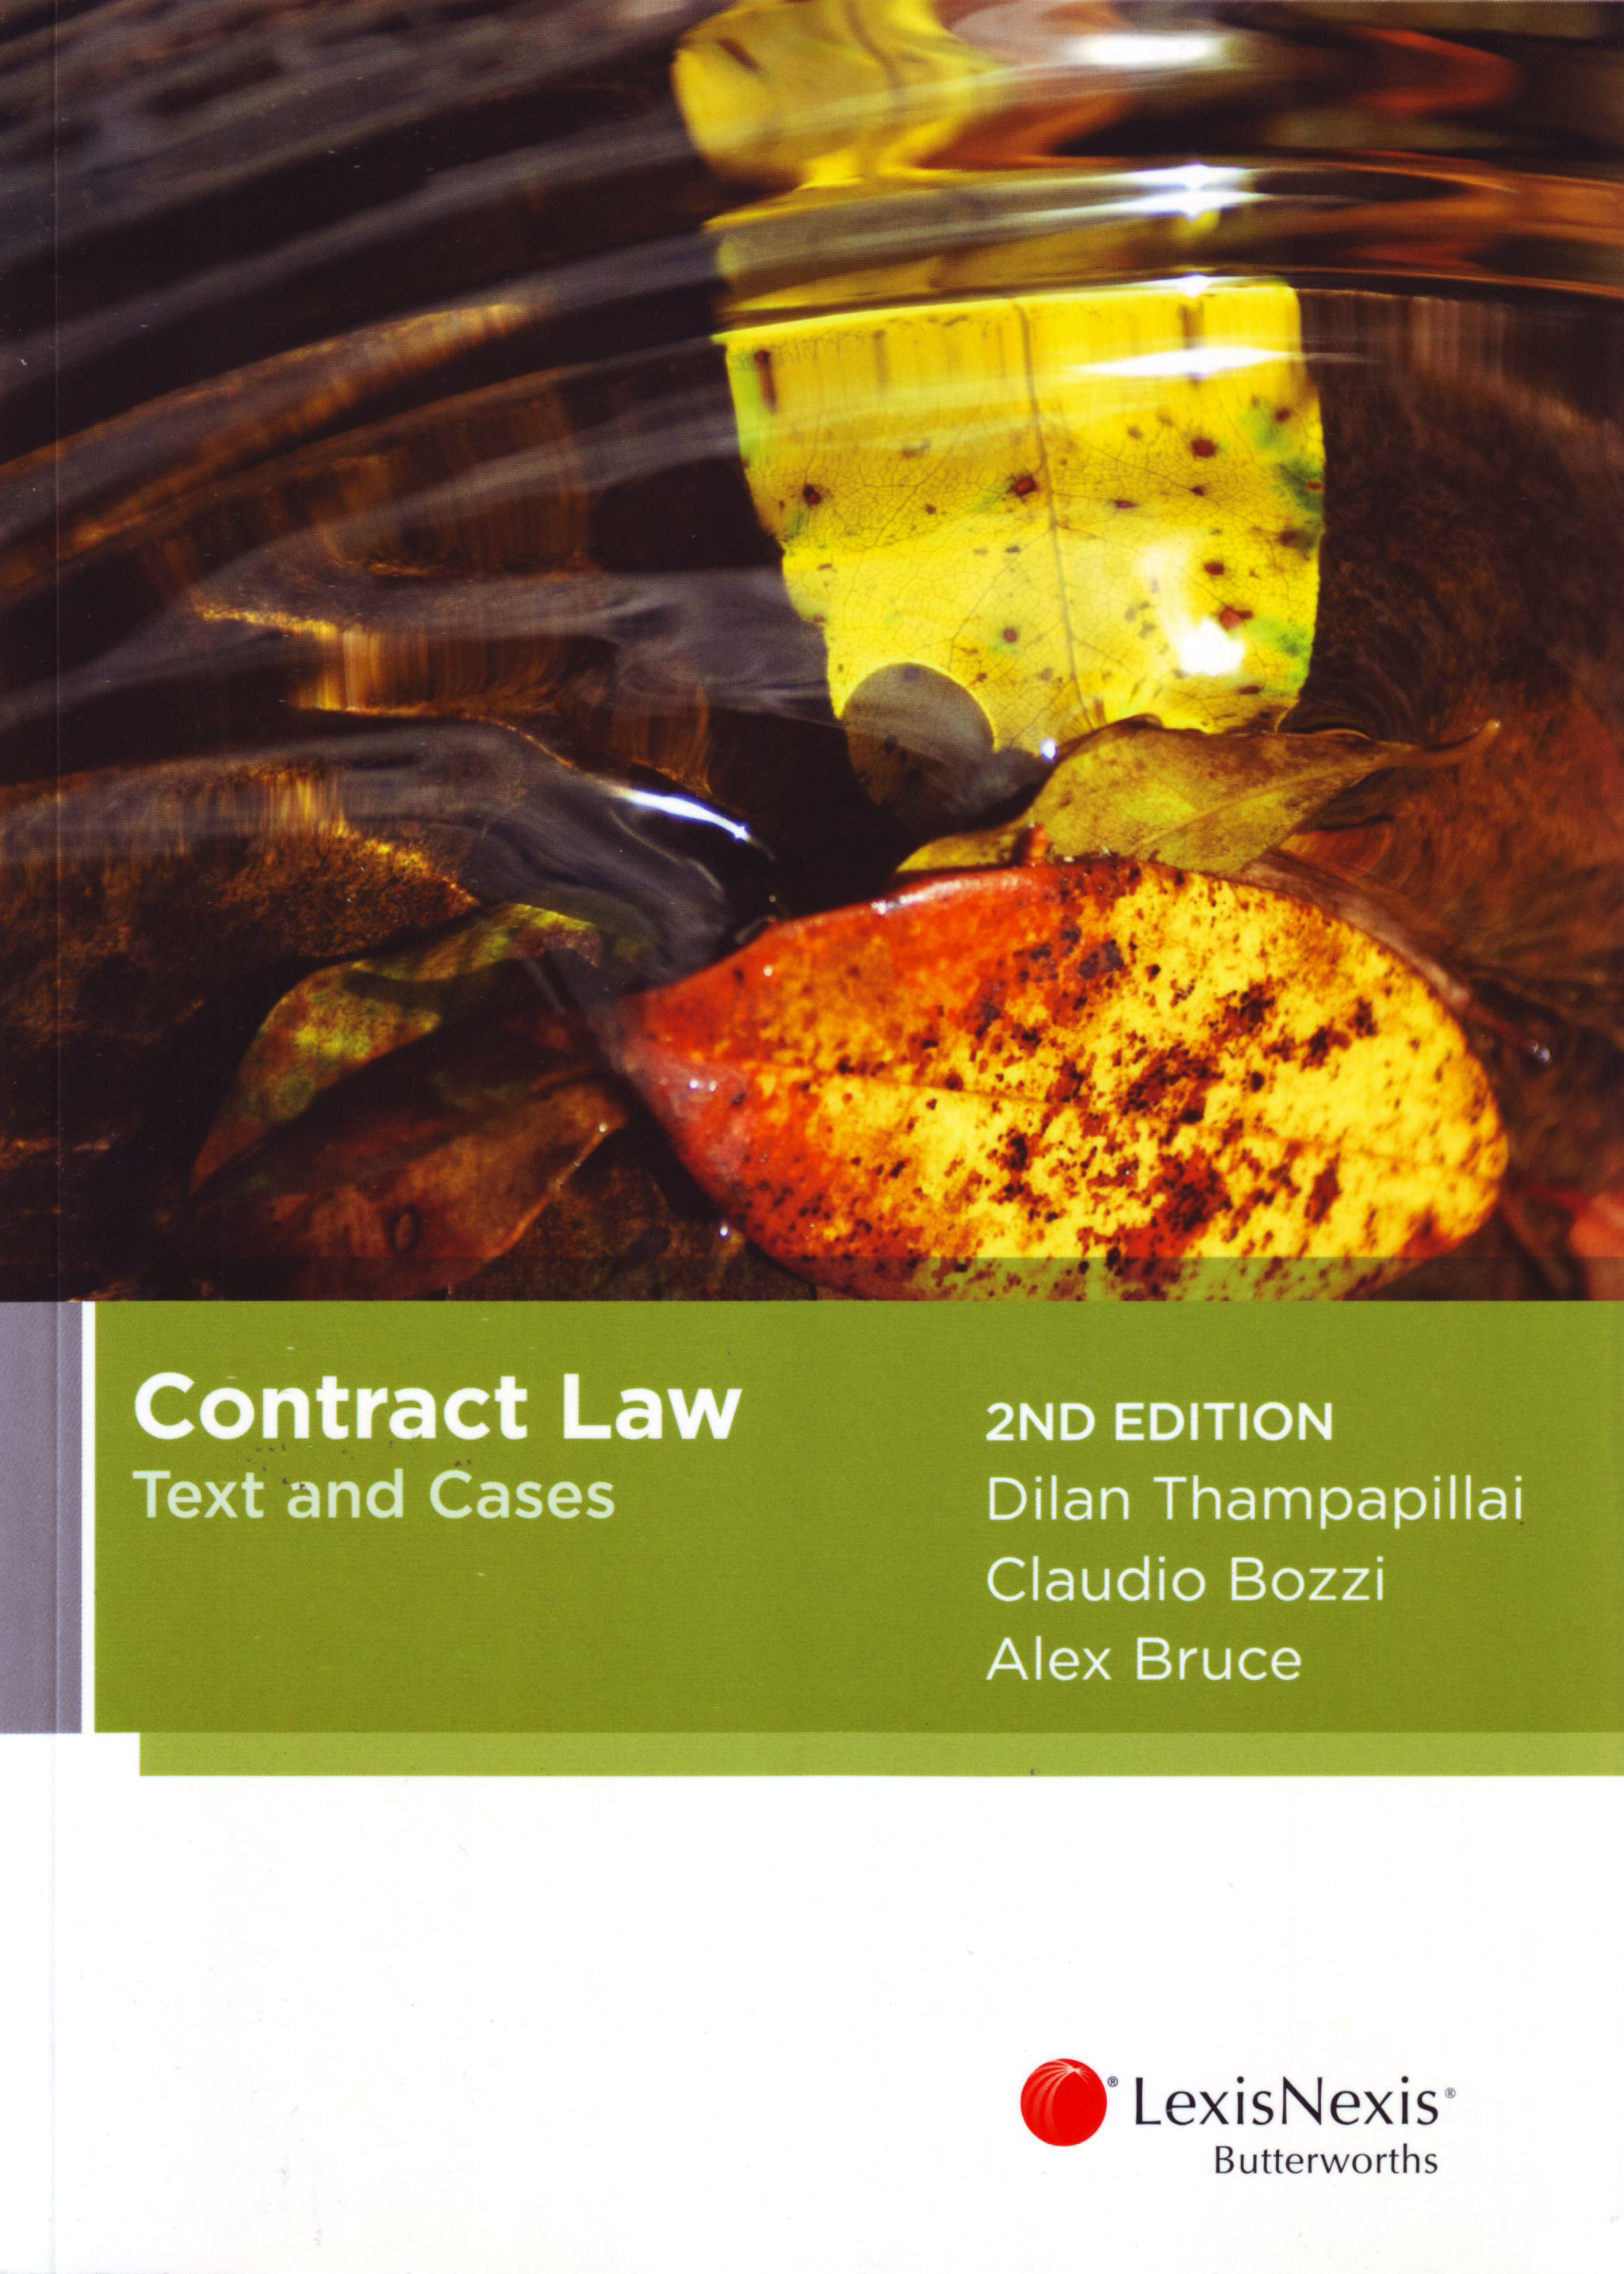 Contract Law: Text and Cases e2